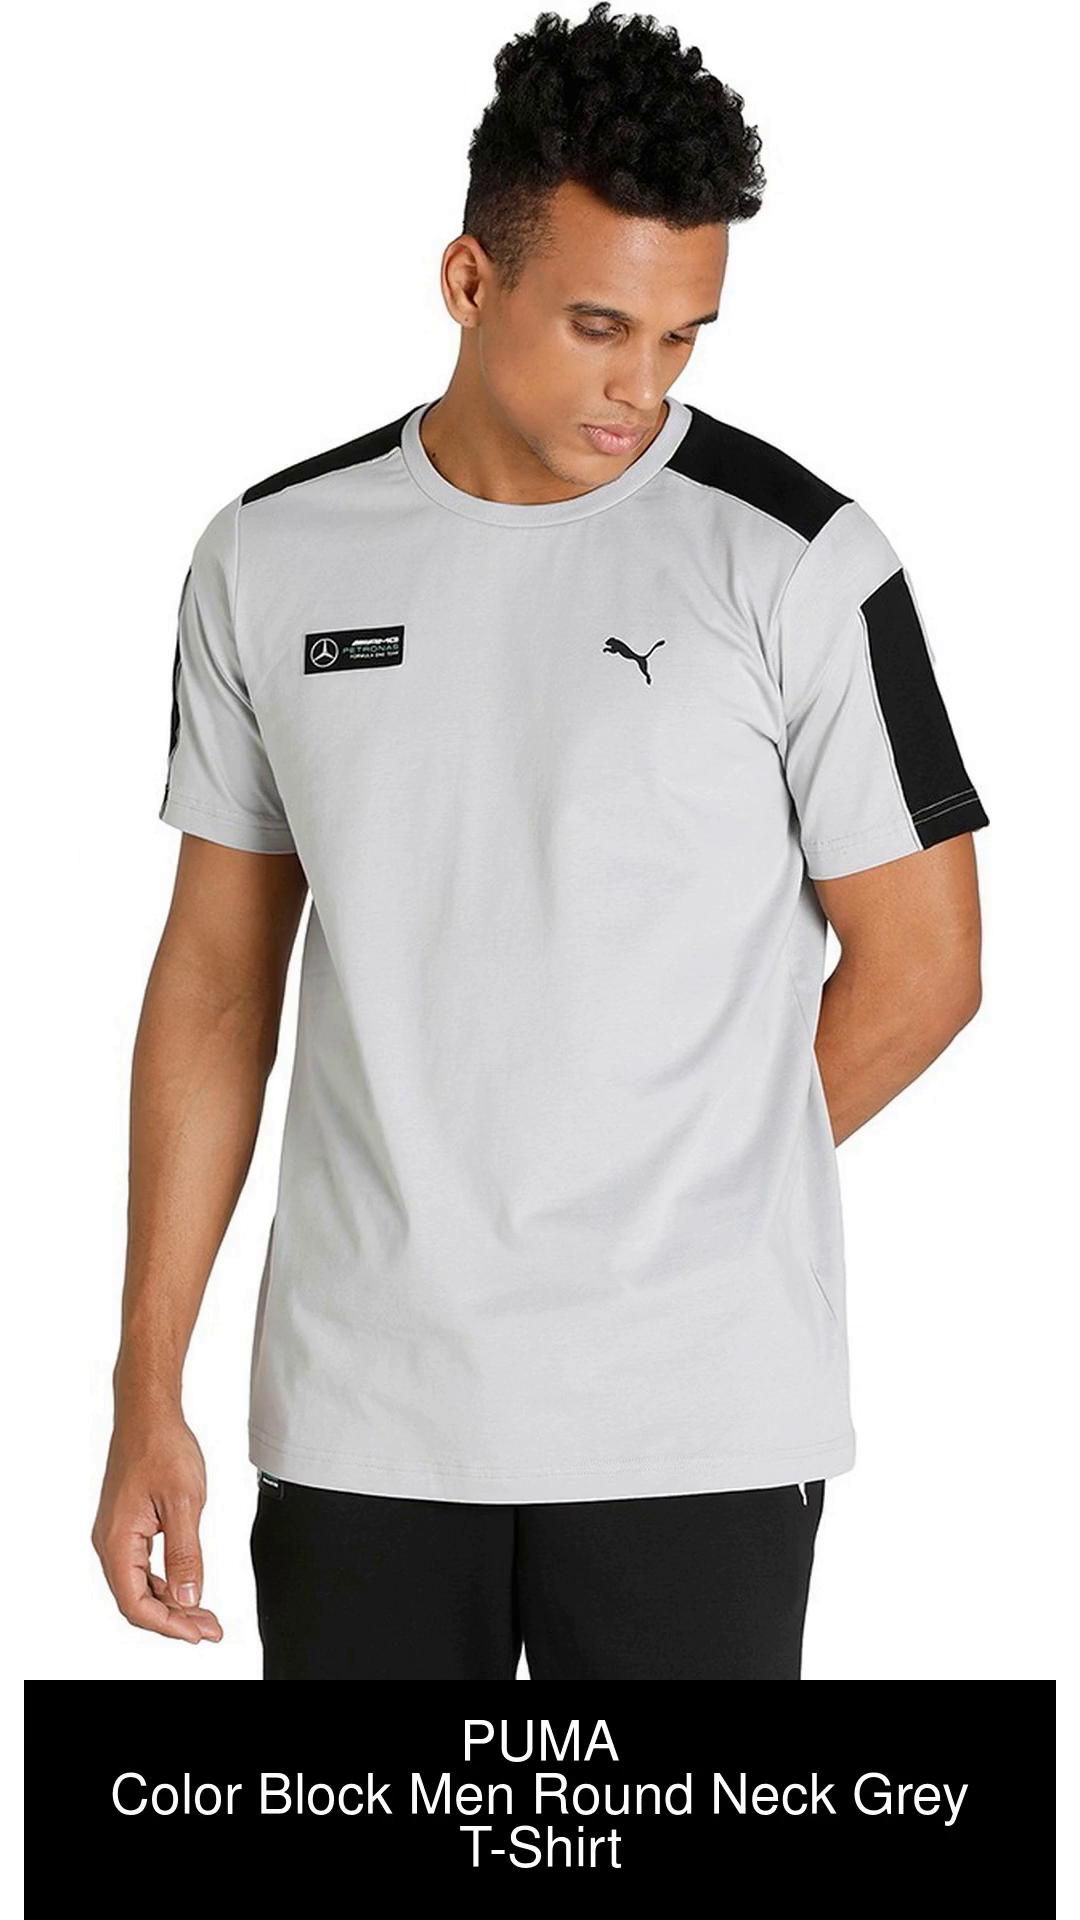 Round Prices T-Shirt Neck PUMA Neck - PUMA Men T-Shirt Buy at Colorblock Grey Best Grey Colorblock Round India Online Men in